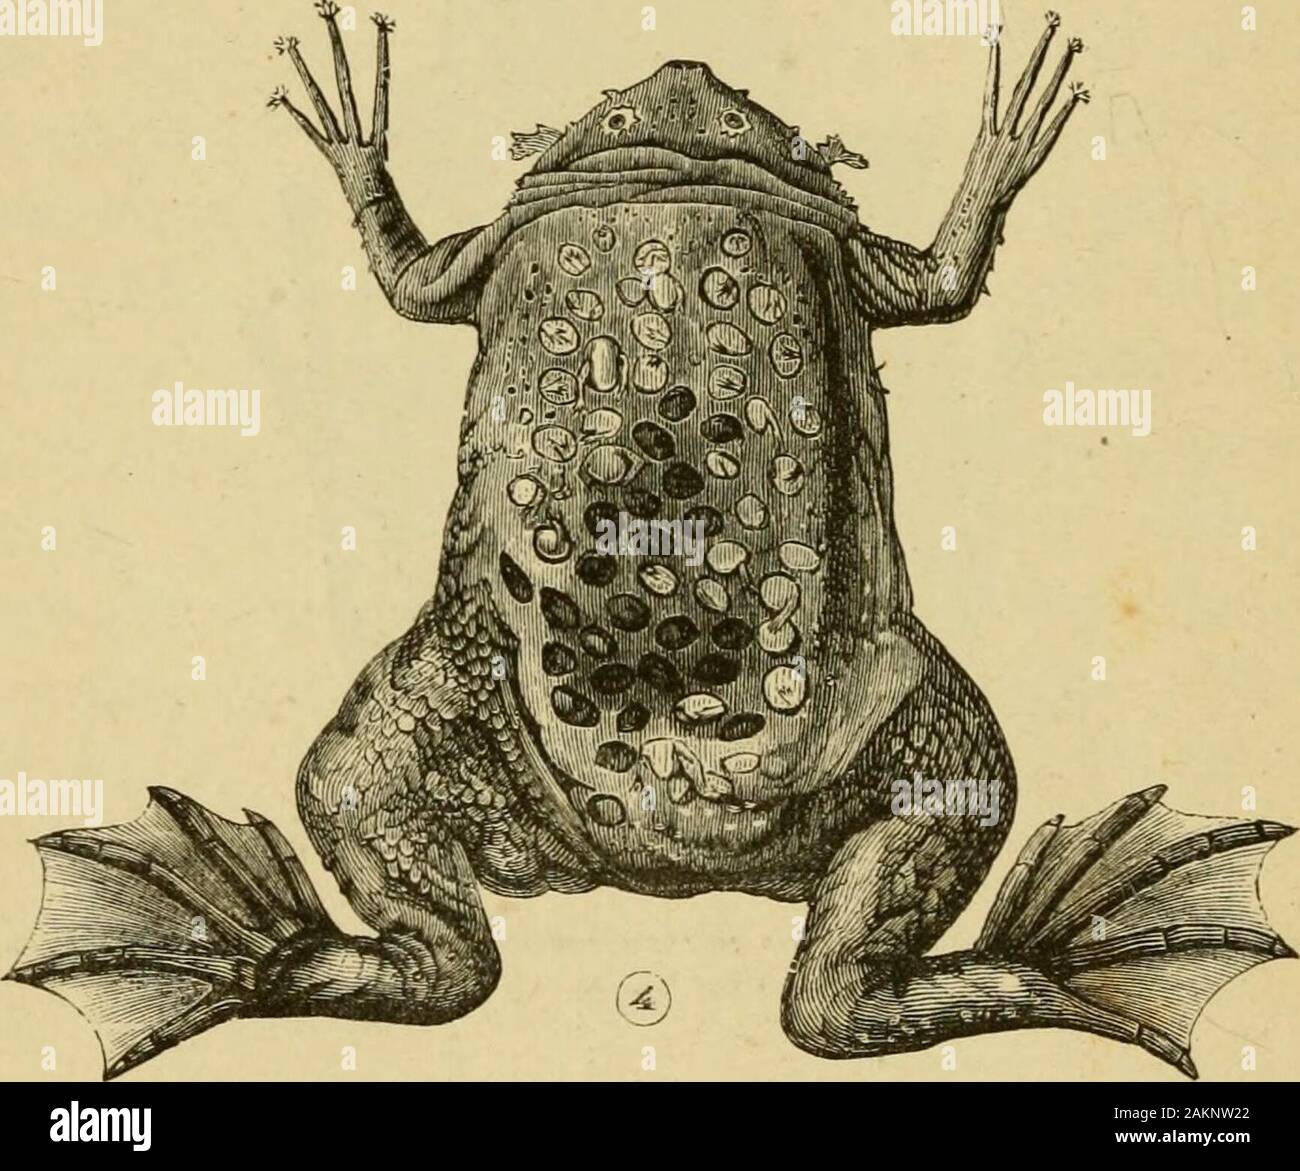 The common frog . Fig. 10.—The female of Noiotreuia mn&gt;-suhiatujii, uuh trie pou;h partly cut open (alter Giiiither). Into this the eggs are introduced for shelter andprotection. A dorsal pouch also exists in the alliedAmerican genus, Opisthodelphys. An American spe-cies of Hylodes has the habit of lavine its ^^^s intrees singly in the axils of leaves, and the onlywater they can obtain is the drop or two whichmay from time to time be there retained. A still more remarkable mode of protecting the^gg is developed by the Great Toad of tropicalAmerica {Pipa americana). In this case the skin H 3 Stock Photo